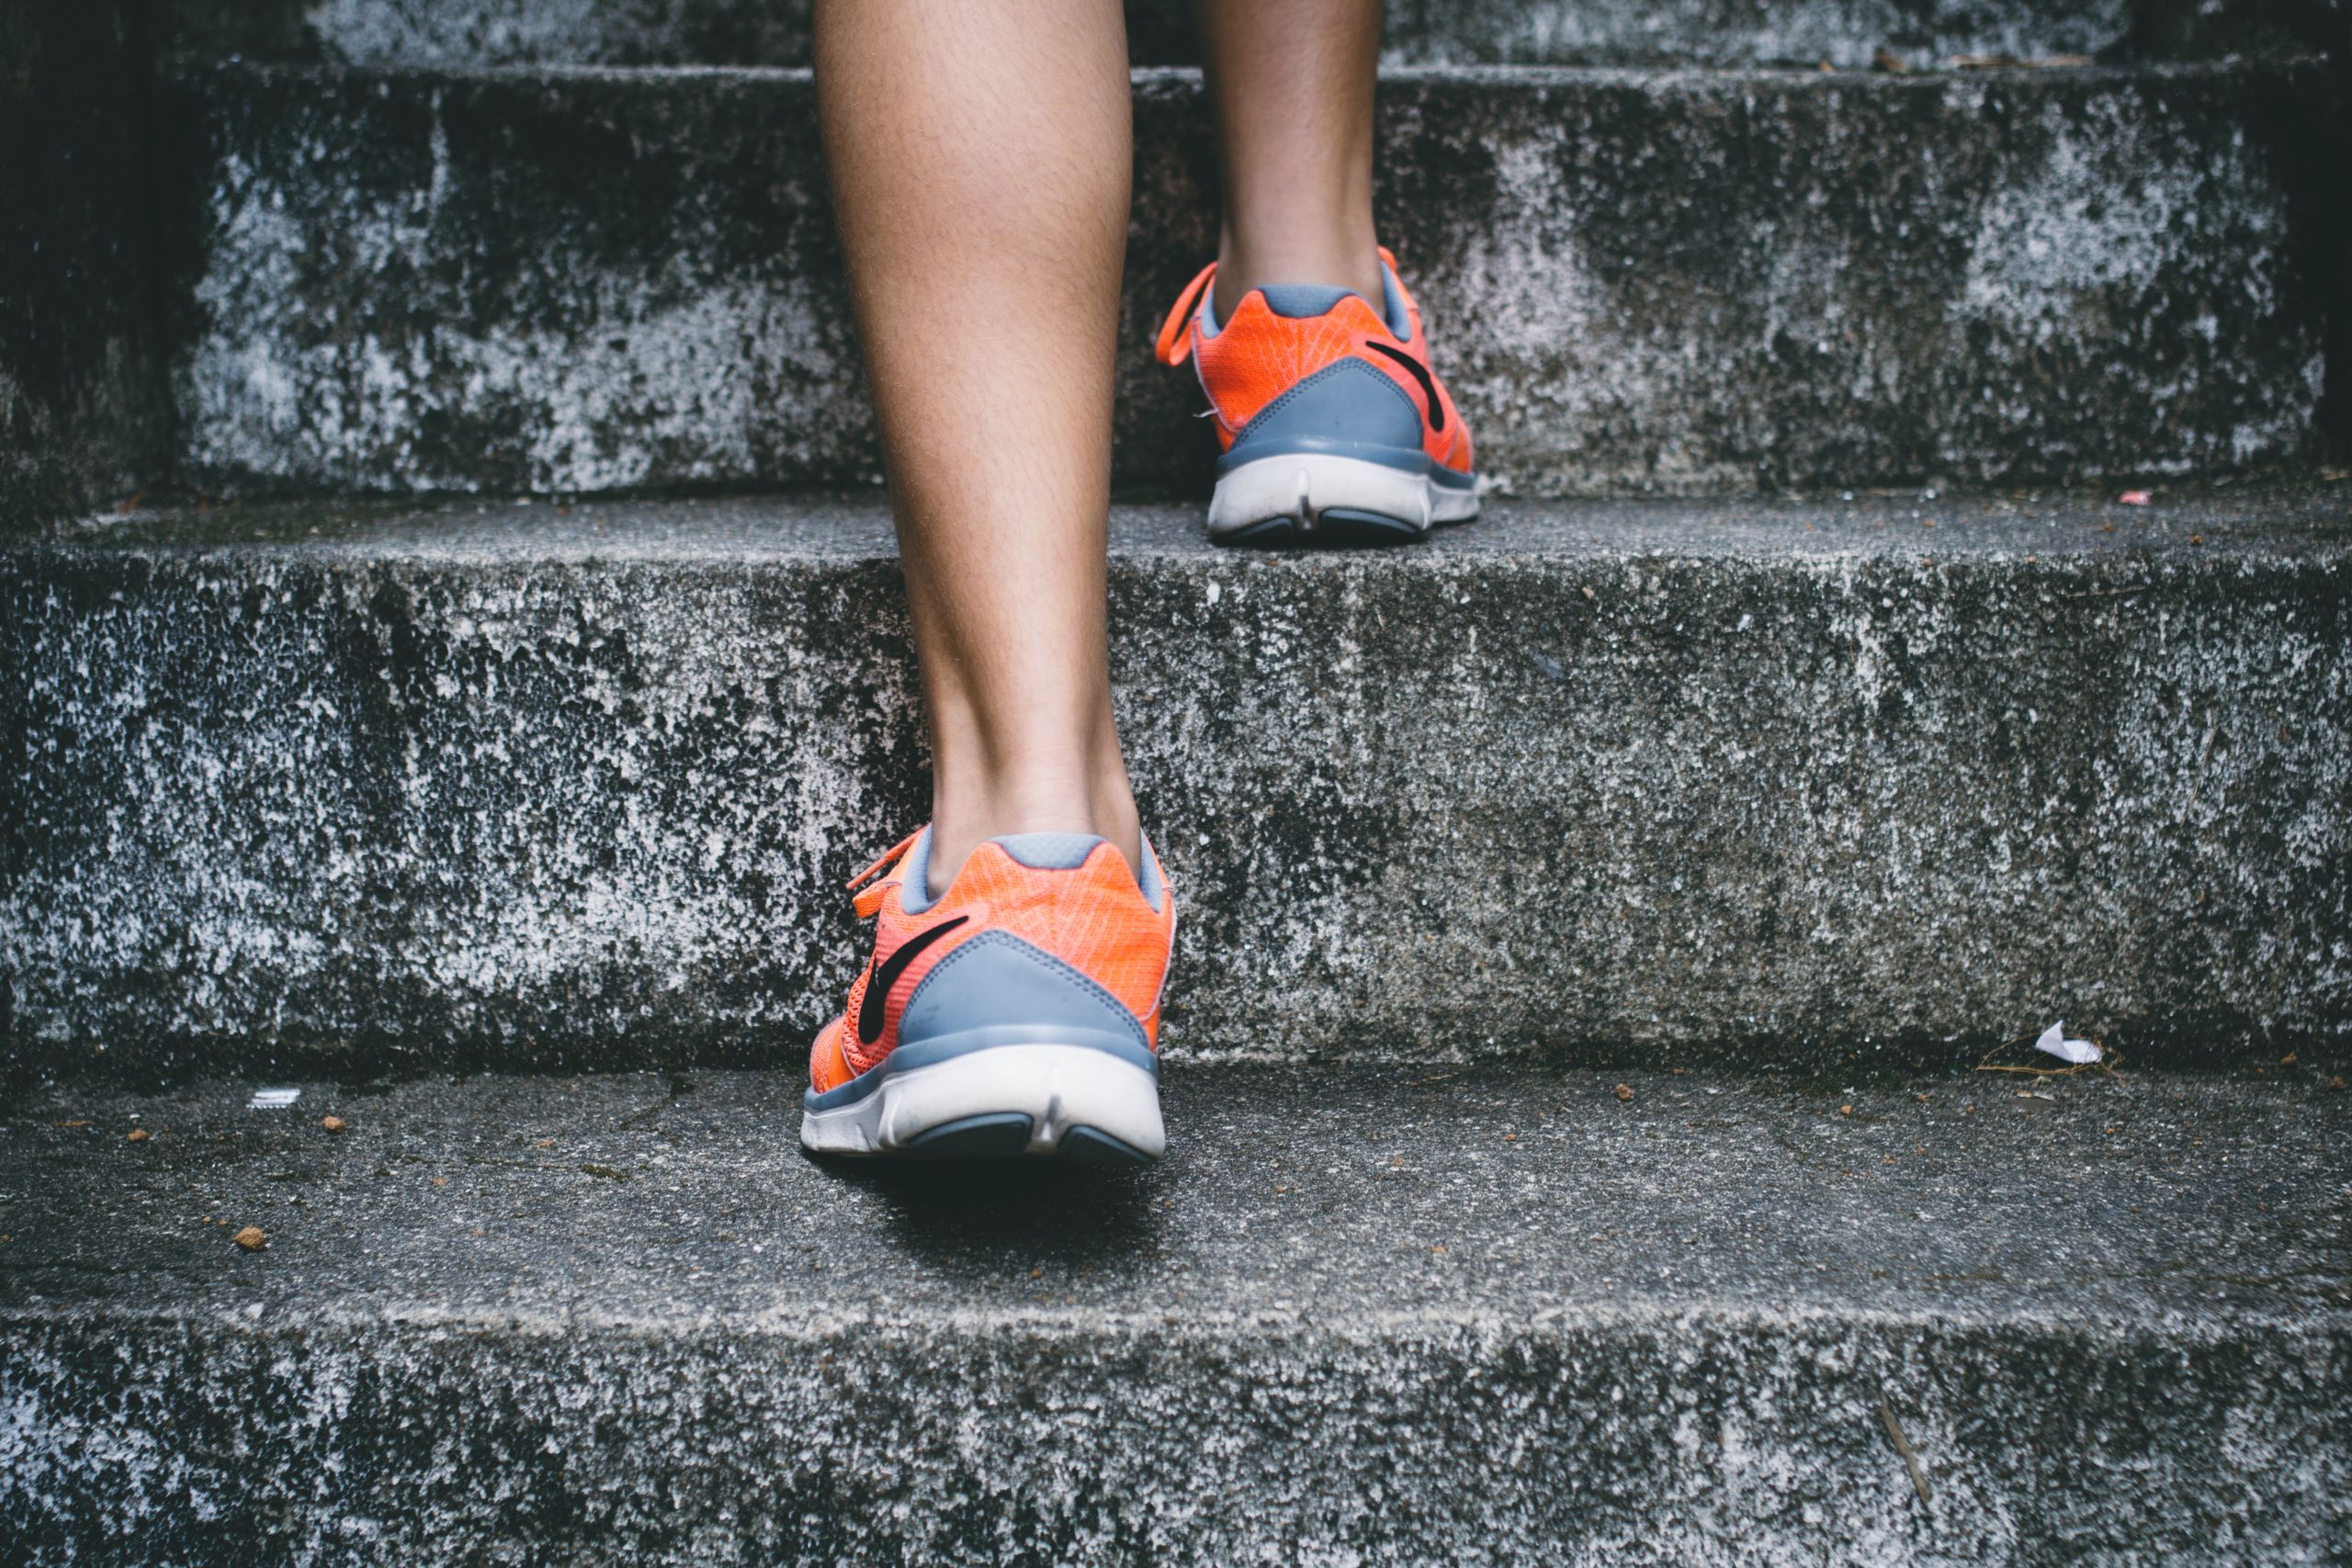 Woman's feet wearing orange and gray running shoes, running up concrete steps